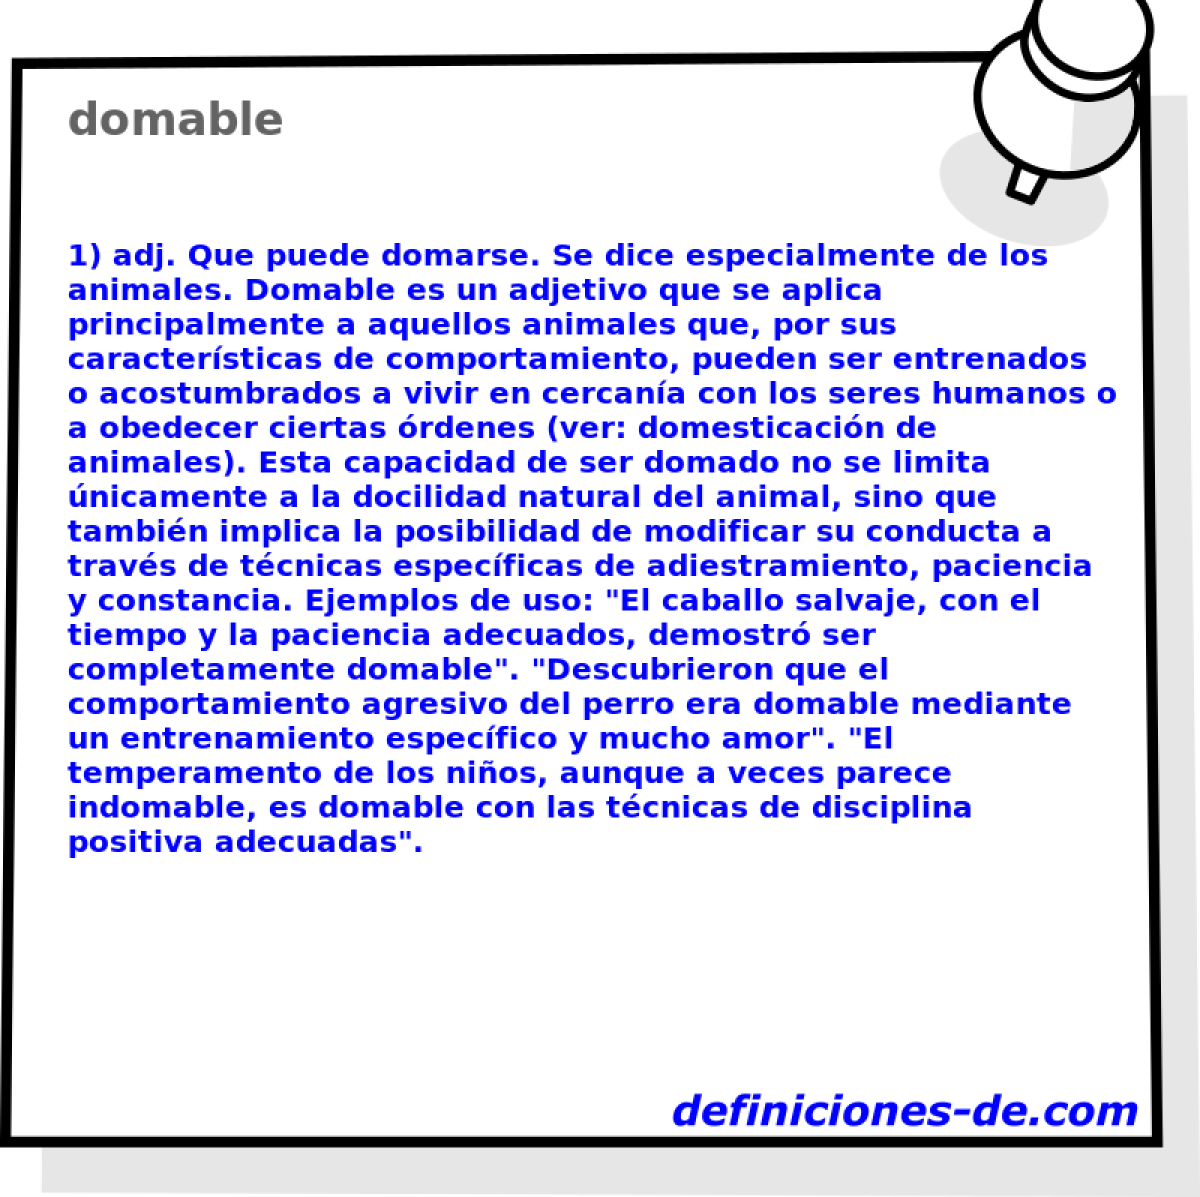 domable 